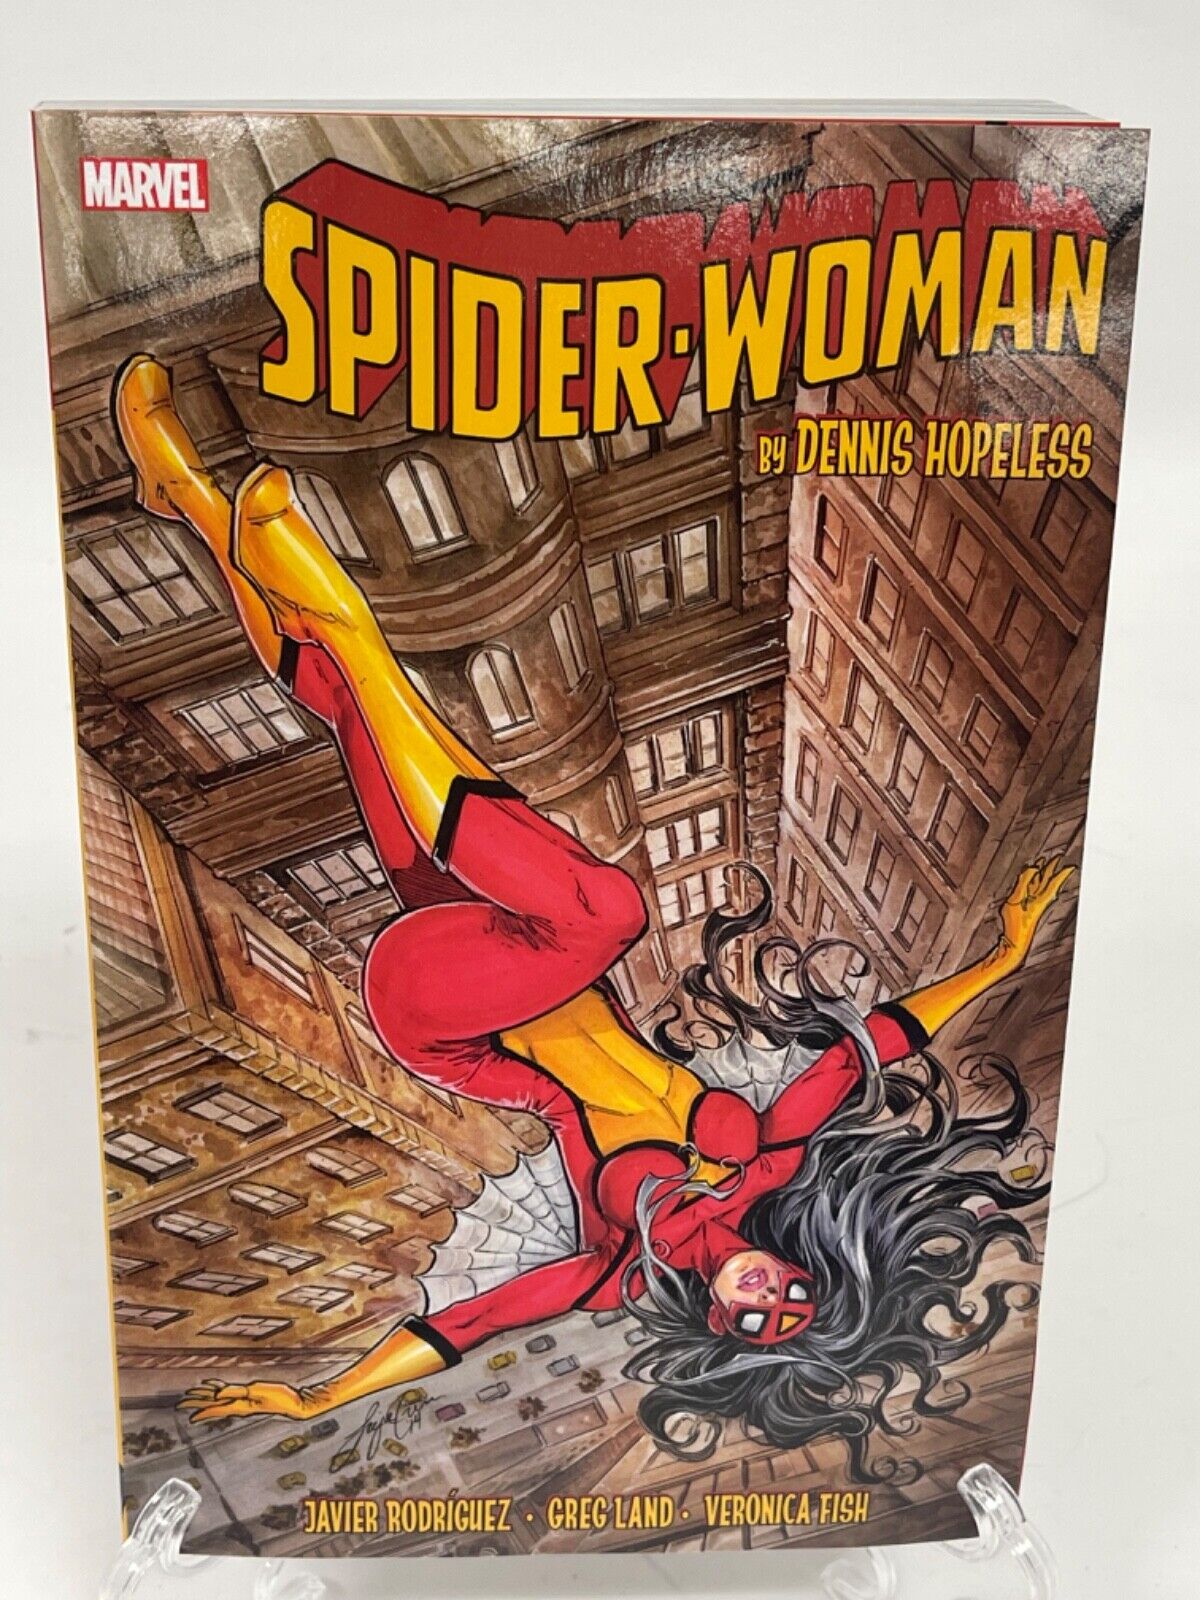 Spider-Woman by Dennis Hopeless Marvel Comics New TPB Trade Paperback